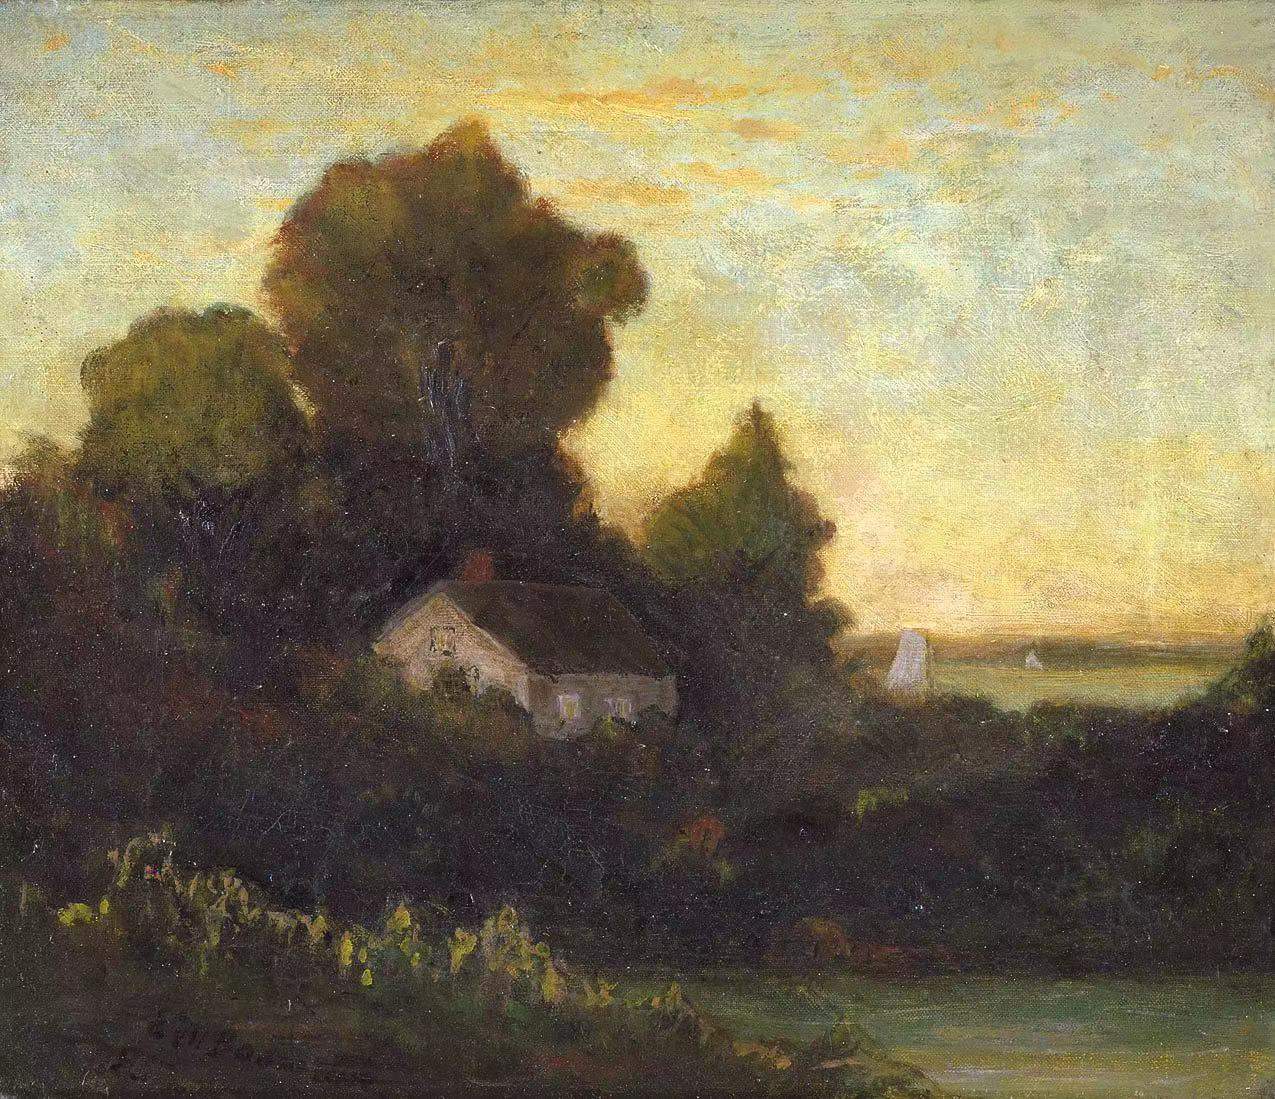 house in woods near lake,Edward Mitchell Bannister,1828-1901